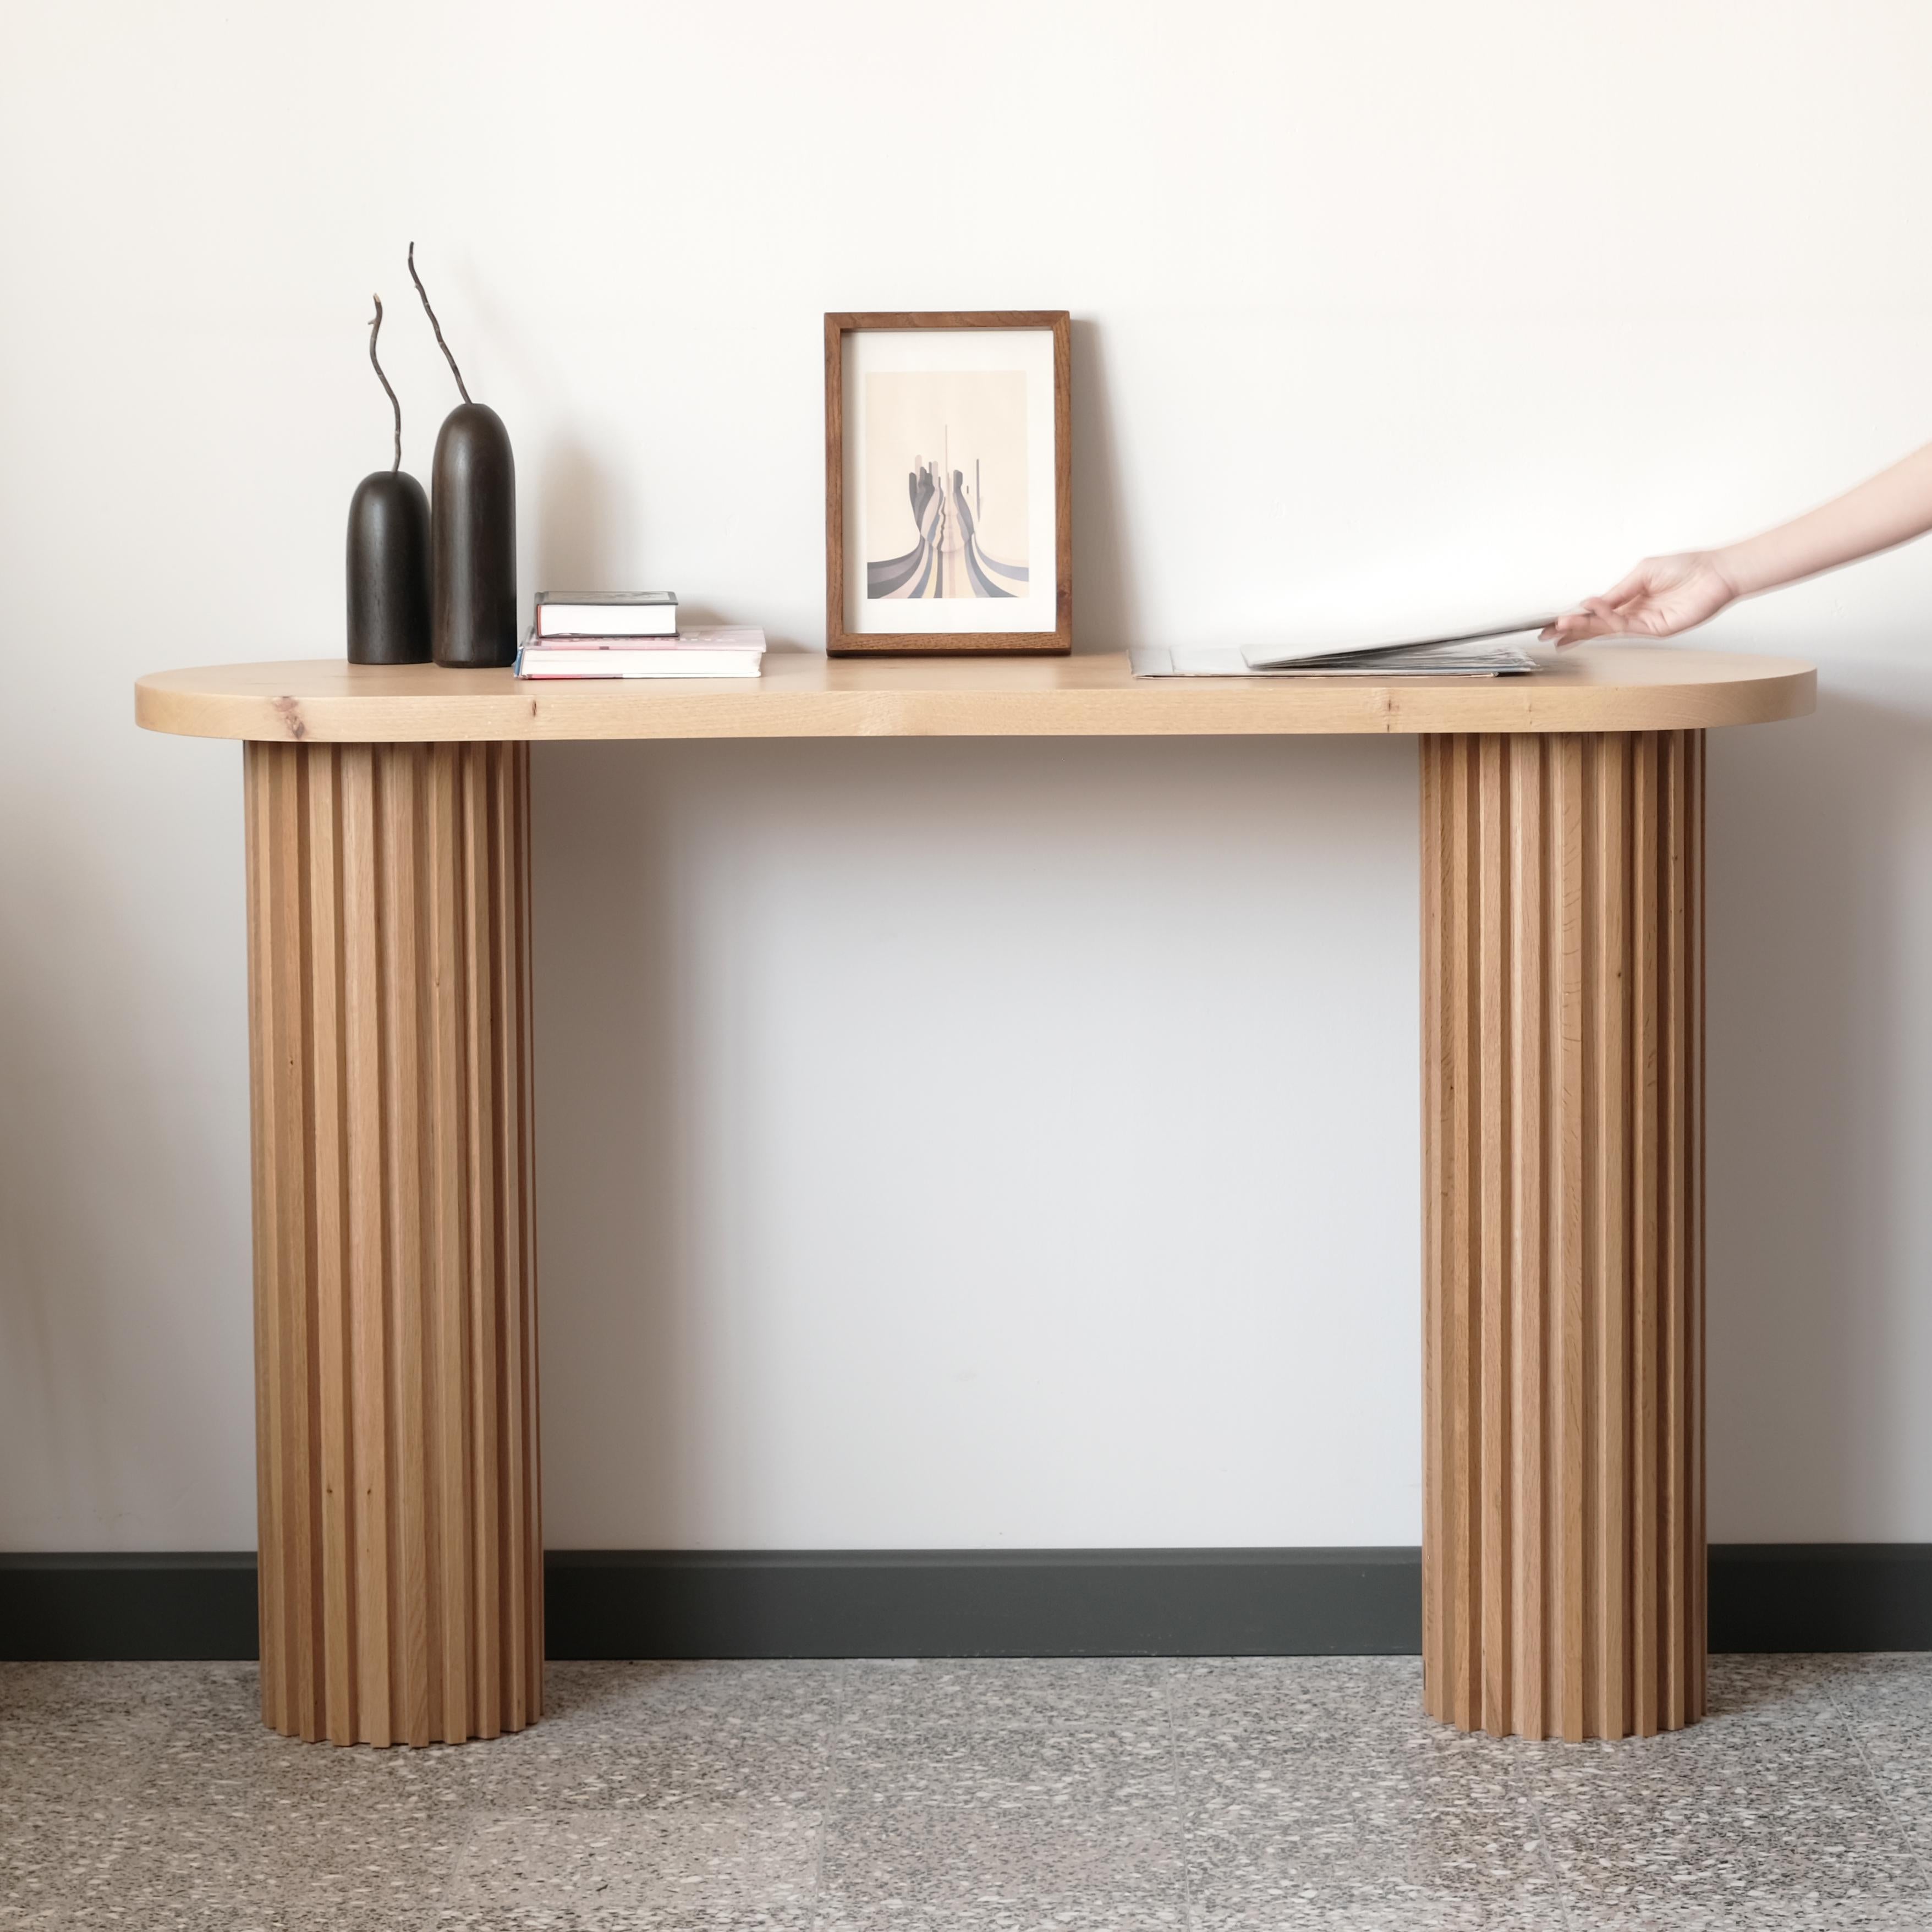 -Included in the Docia Series, this high sidetable has a first-class oak tabletop and two leg made of independent slats. Suitable for your entrance and seperator. 
-The DOCIA Dressuar, crafted with handcrafted, brings the scent and warmth of solid